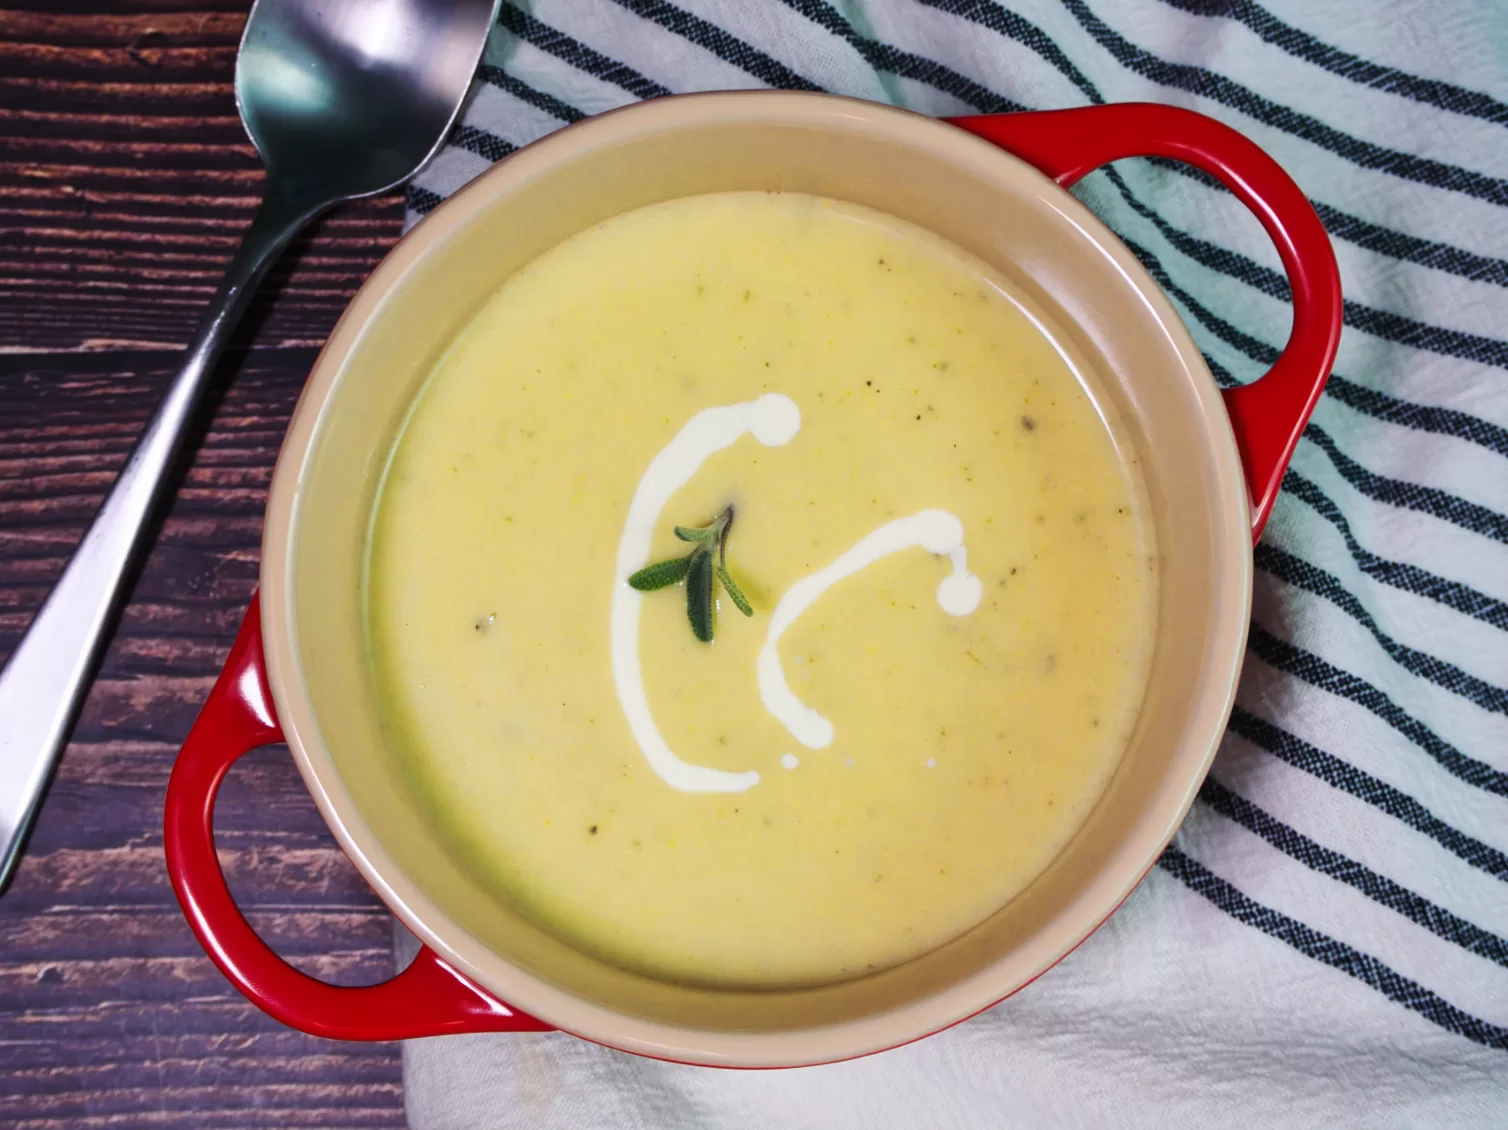 My method to #safely #puree #soup with an immersion blender